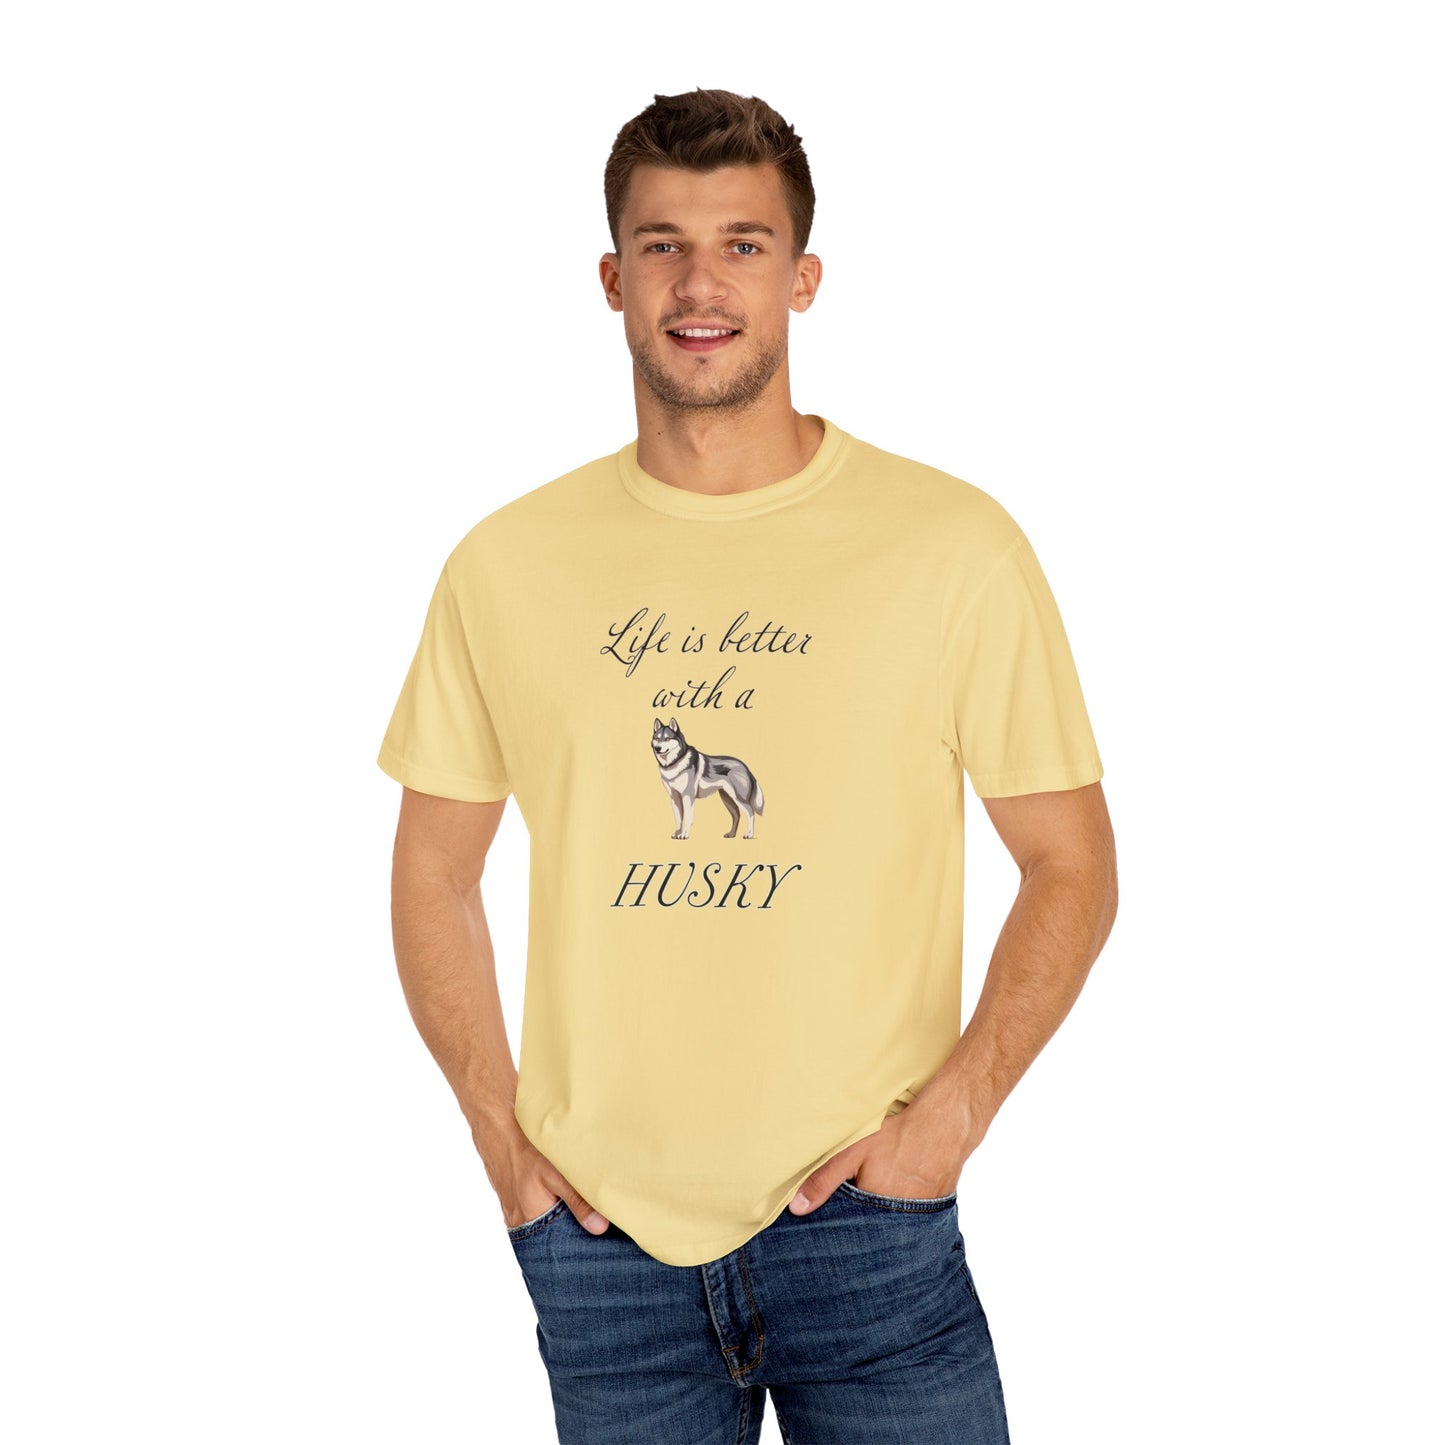 Life is Better with a Husky Tshirt - Unisex Garment-Dyed T-shirt